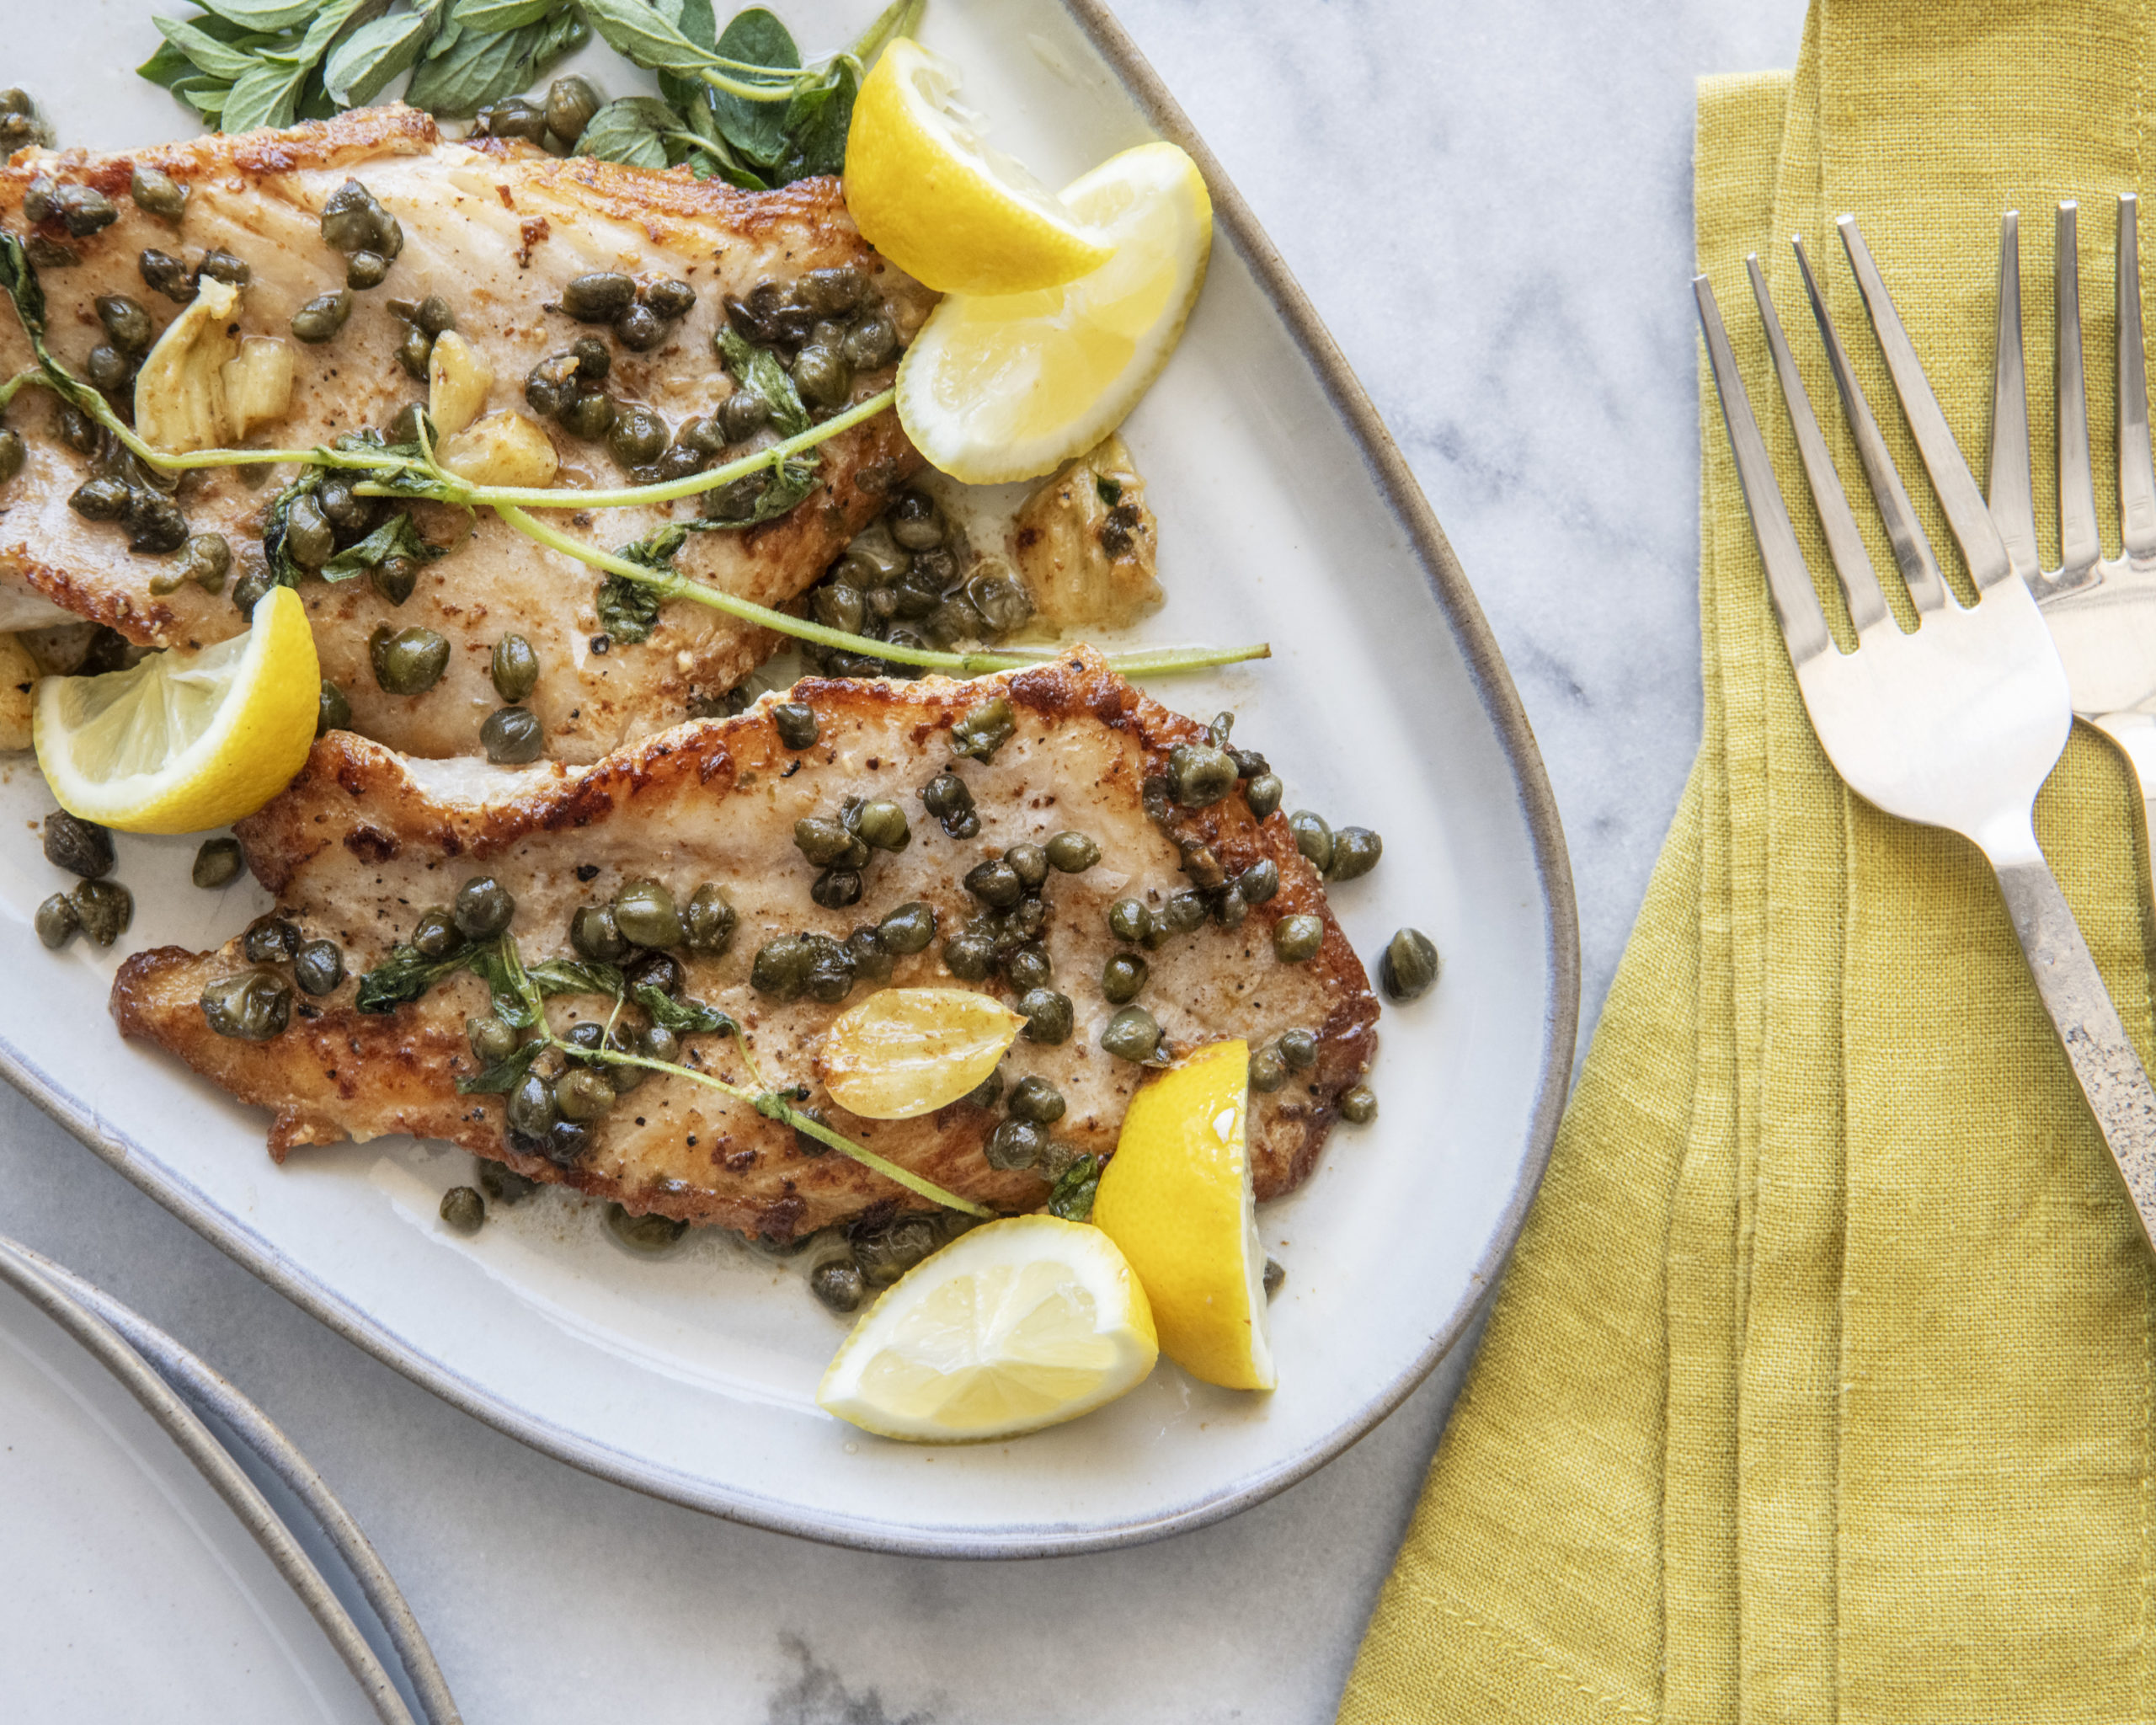 http://recipes.farmhousedelivery.com/wp-content/uploads/2022/03/Recipe_Pan-Seared-Grouper-with-Garlic-Capers-and-Lemon-Brown-Butter_Winslow_006-Final-8610-scaled.jpg